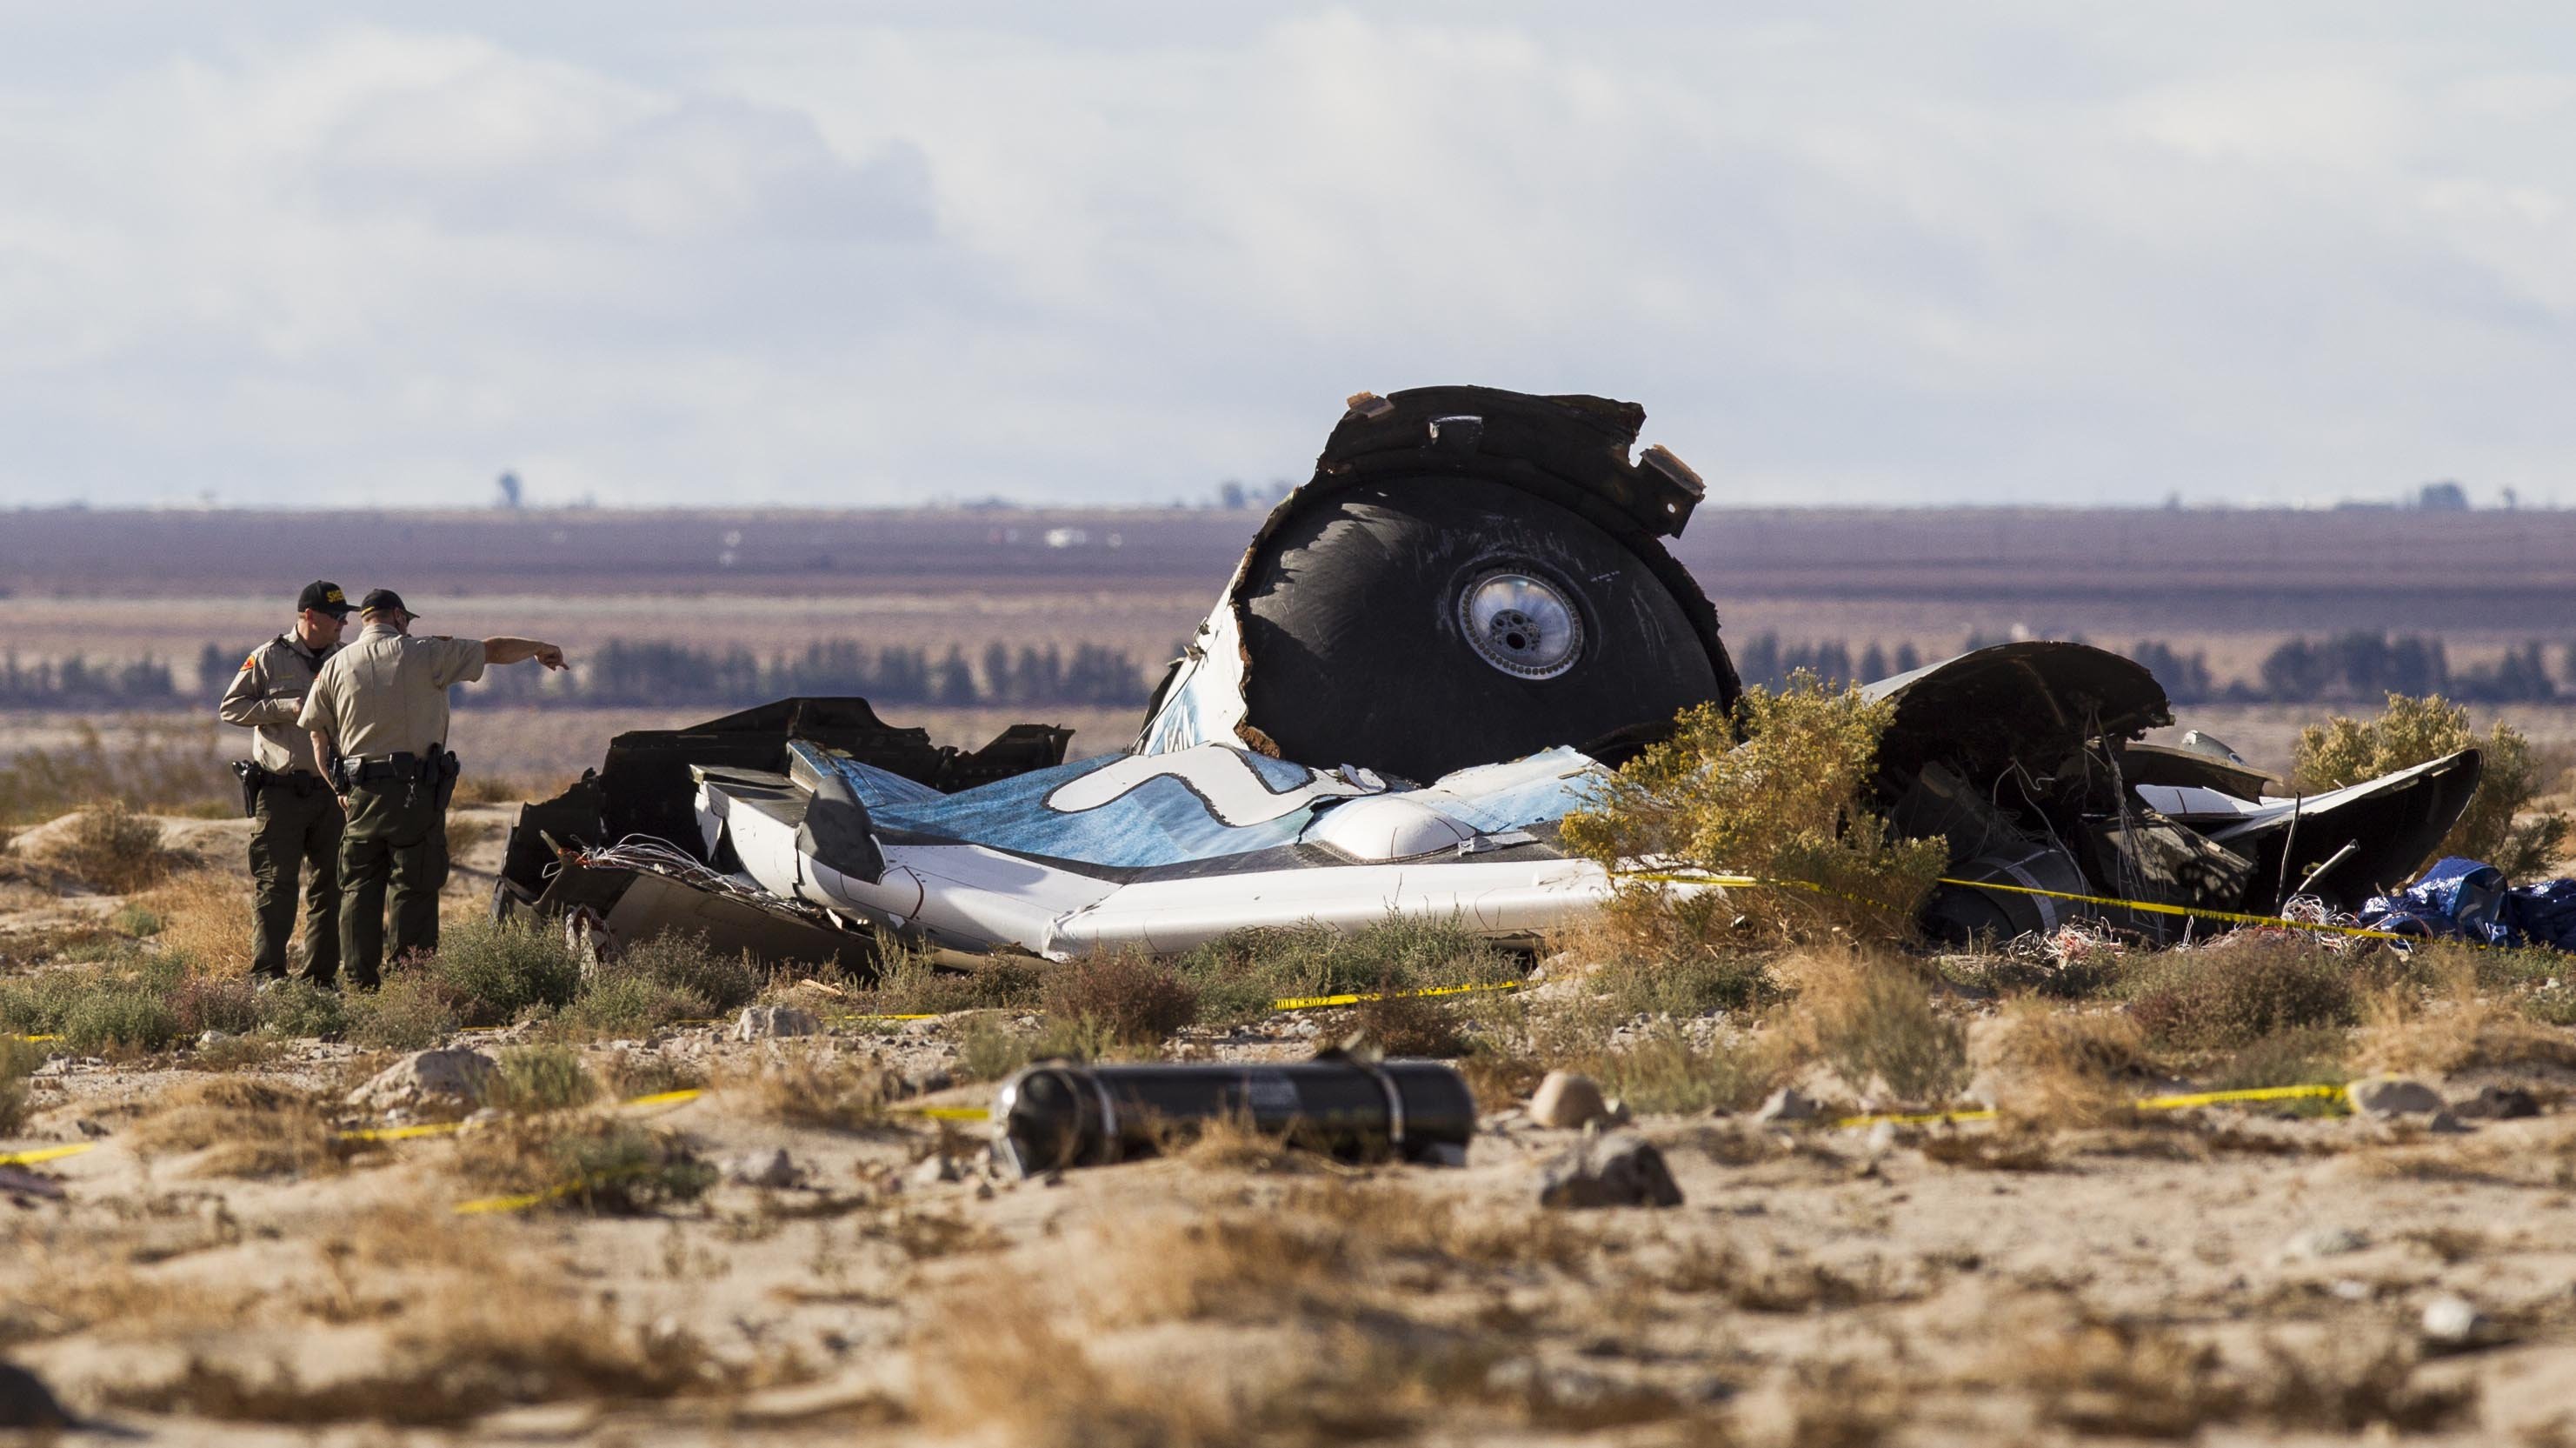 Law enforcement officers take a closer look at the wreckage near the site where a Virgin Galactic space tourism rocket, SpaceShipTwo, exploded and crashed in Mojave, Calif. on Nov 1, 2014. (Ringo H.W. Chiu—AP)